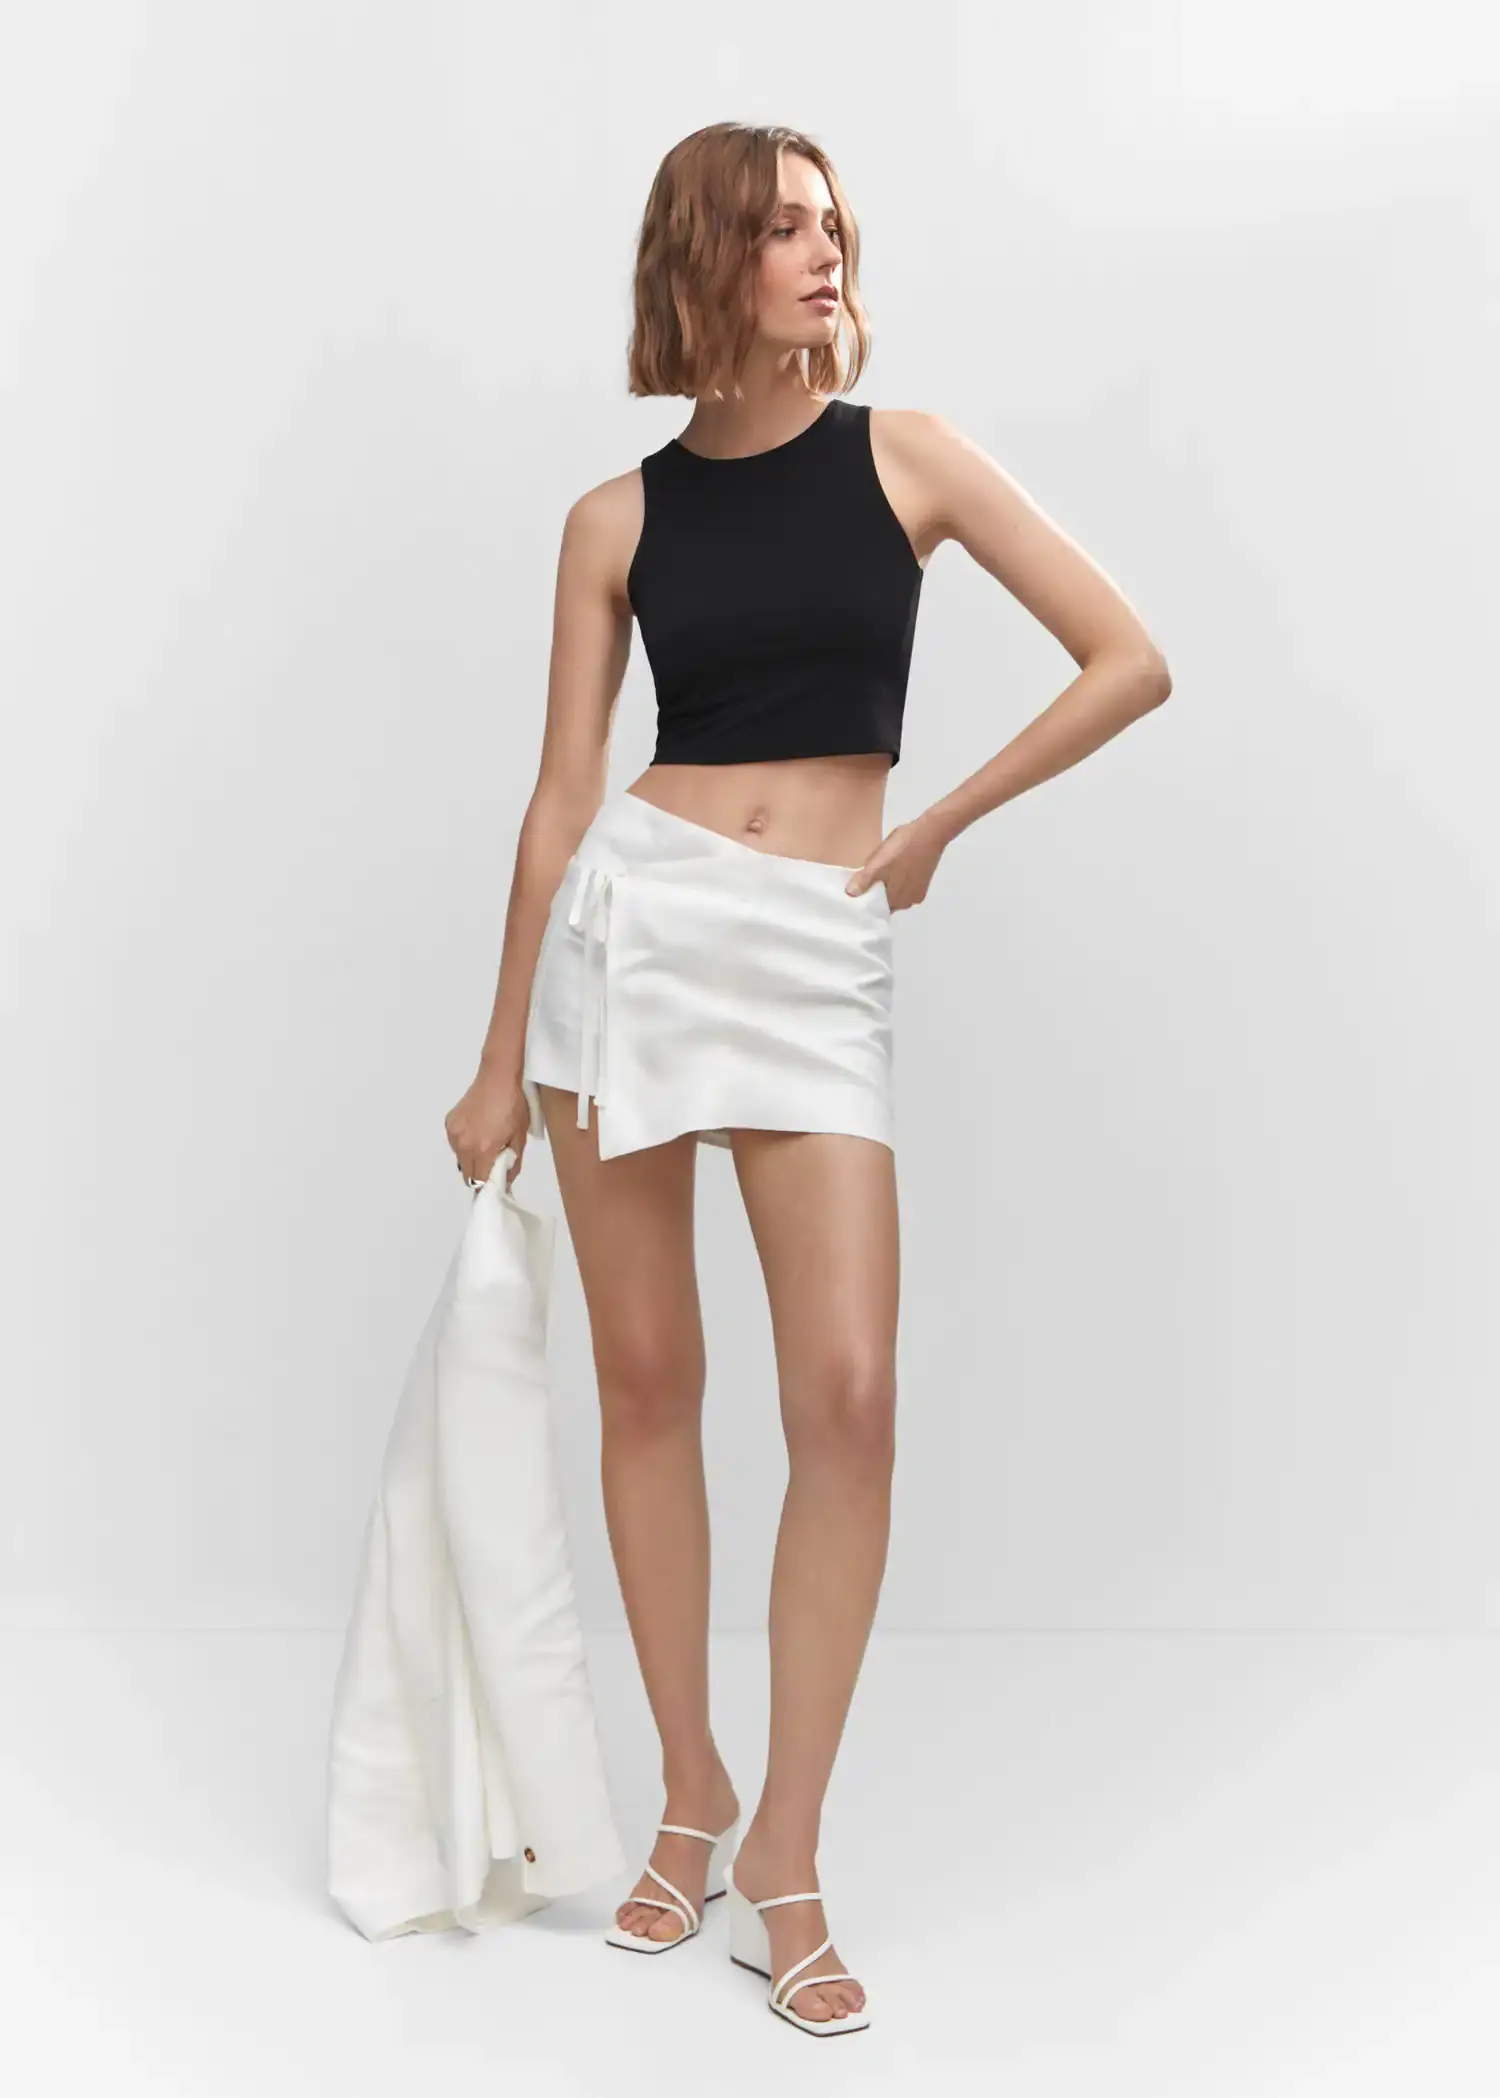 Mango Crop top with halter neck. a woman wearing a black top and white skirt. 